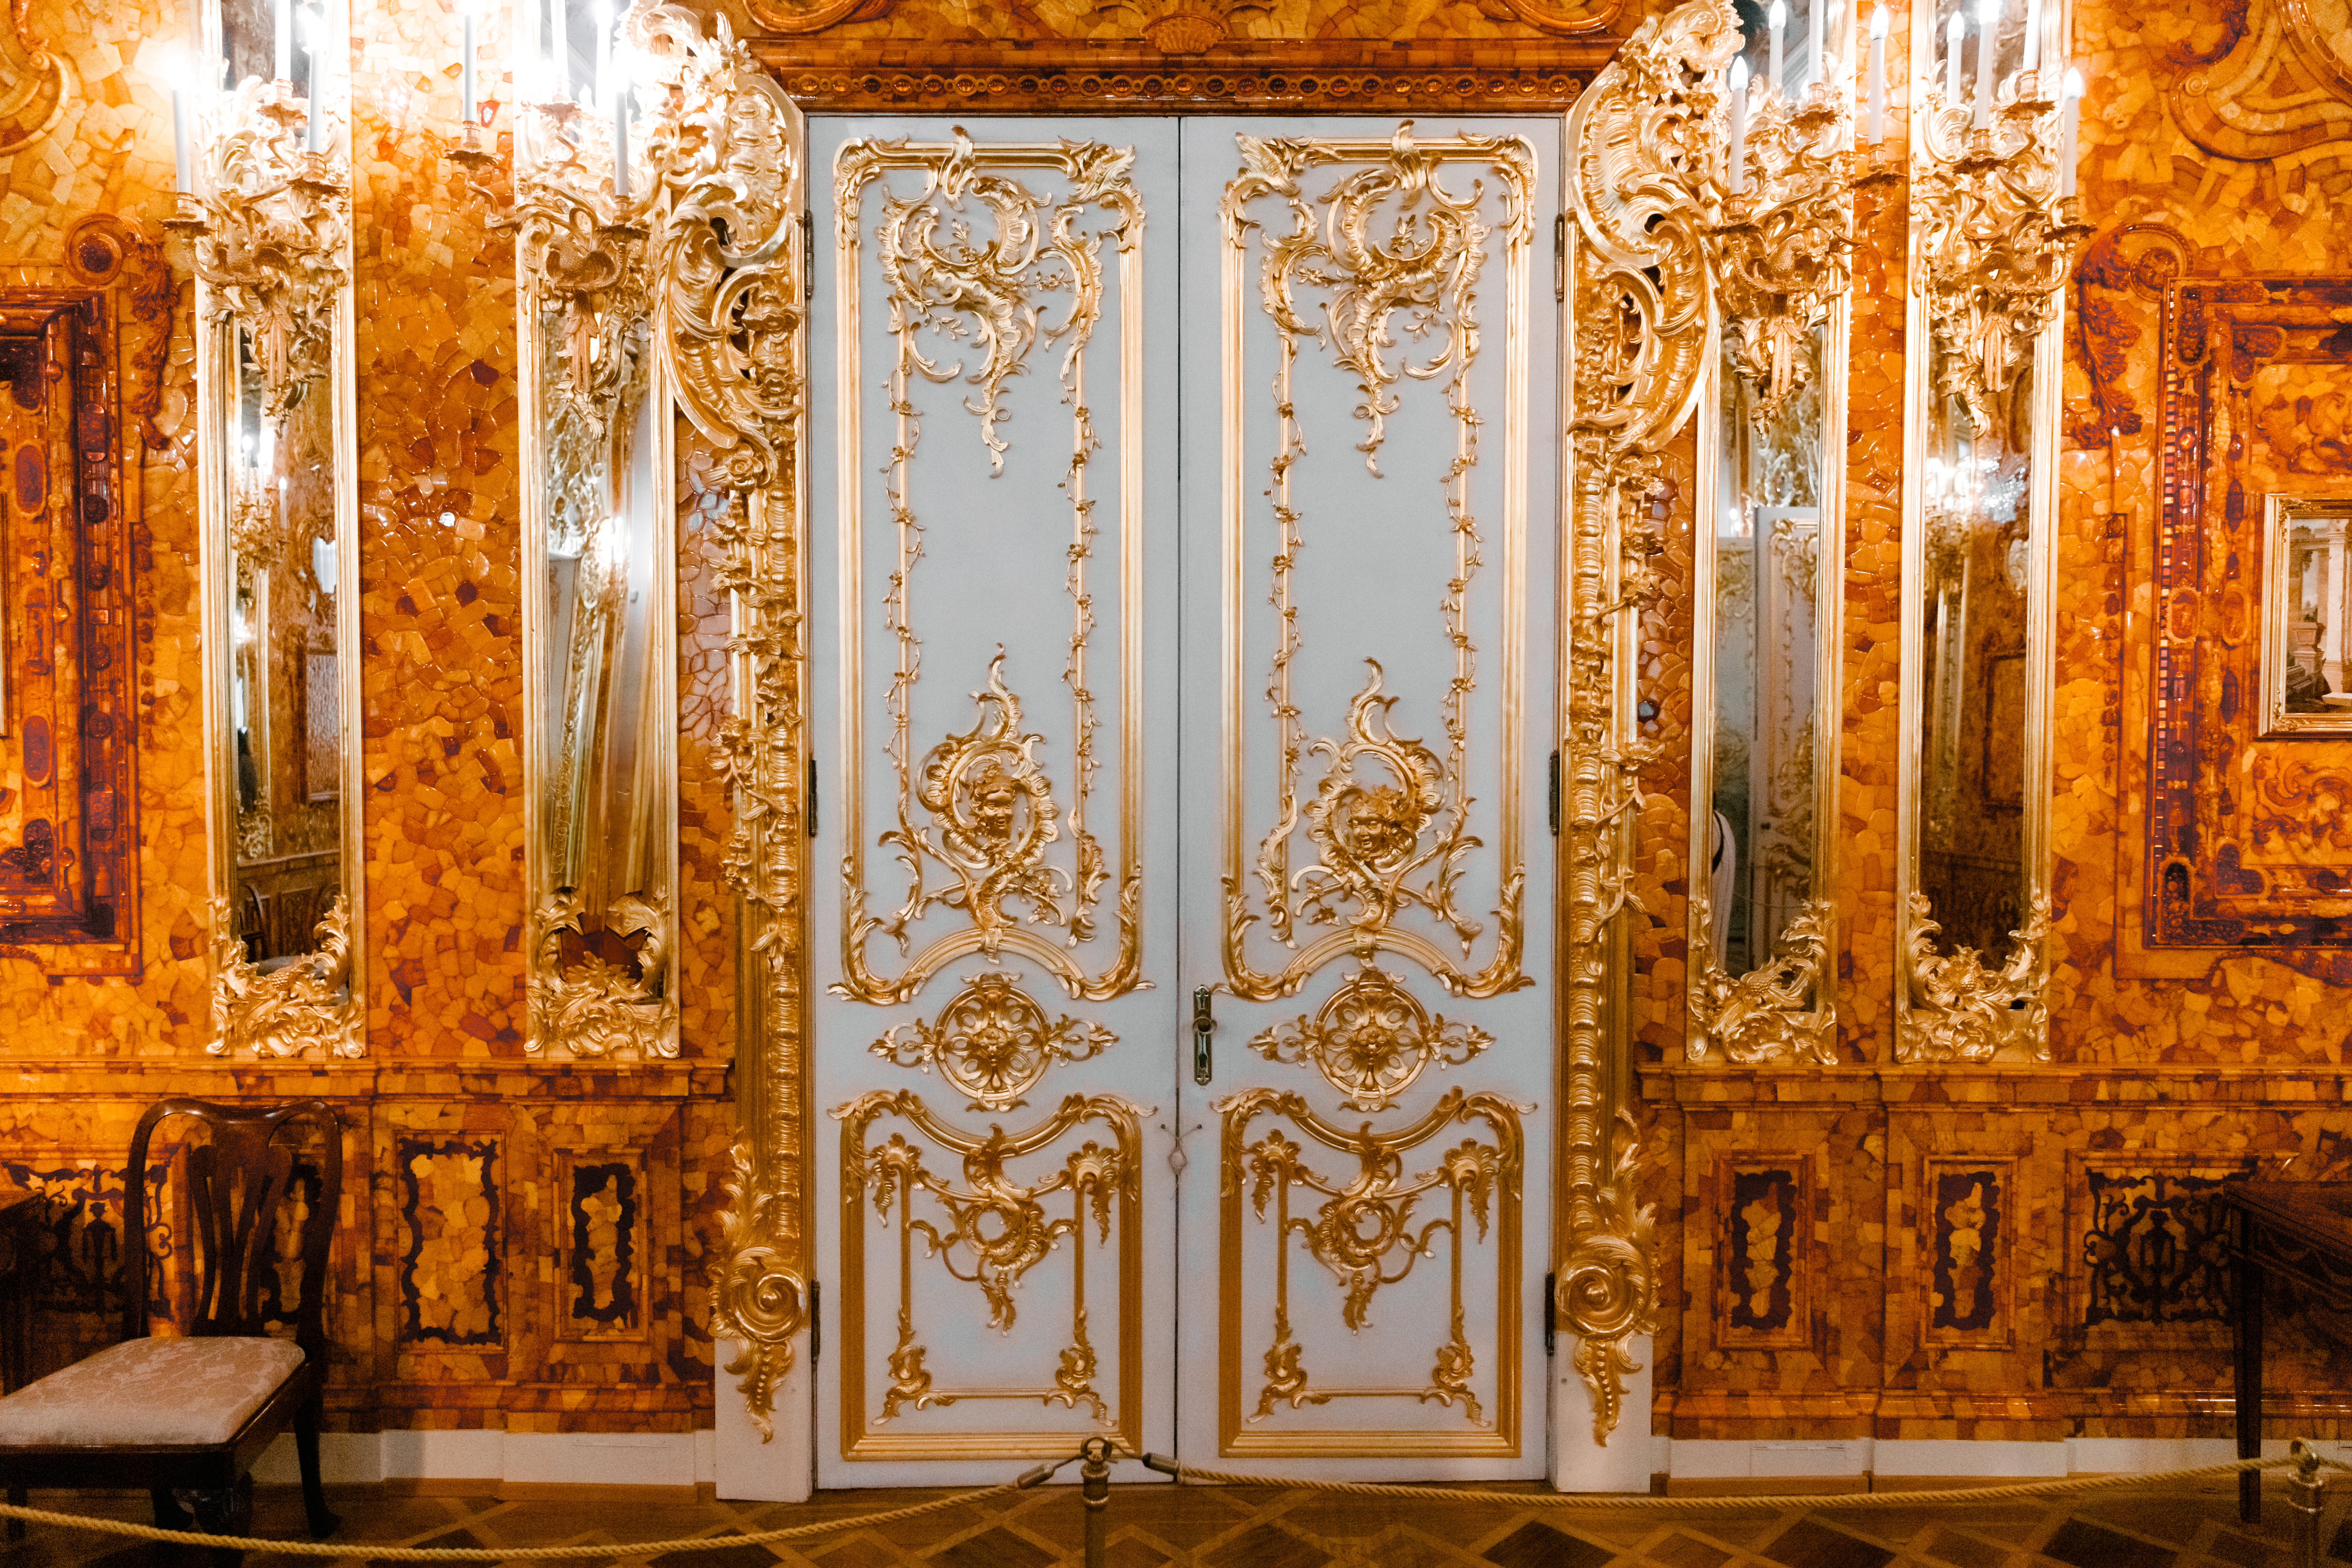 The Amber Room in Catherine palace in Pushkin